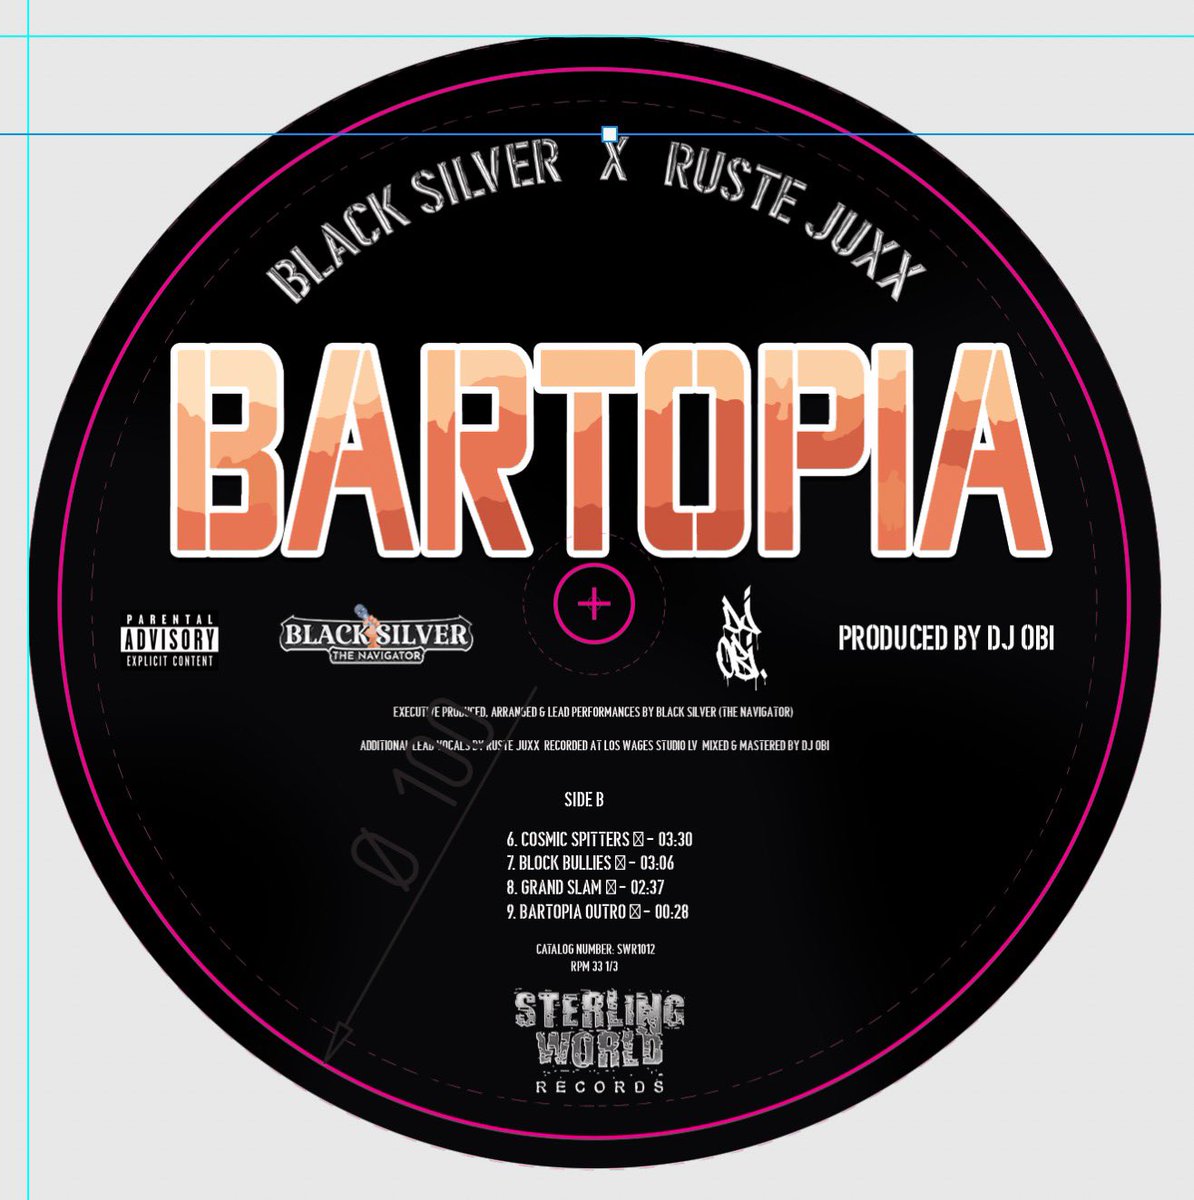 The BARPOLAR remix vinyl BARTOPIA is ordered and on its way. Pretty stoked about this effort. Let’s go! simple.m.wikipedia.org/wiki/Black_Sil…